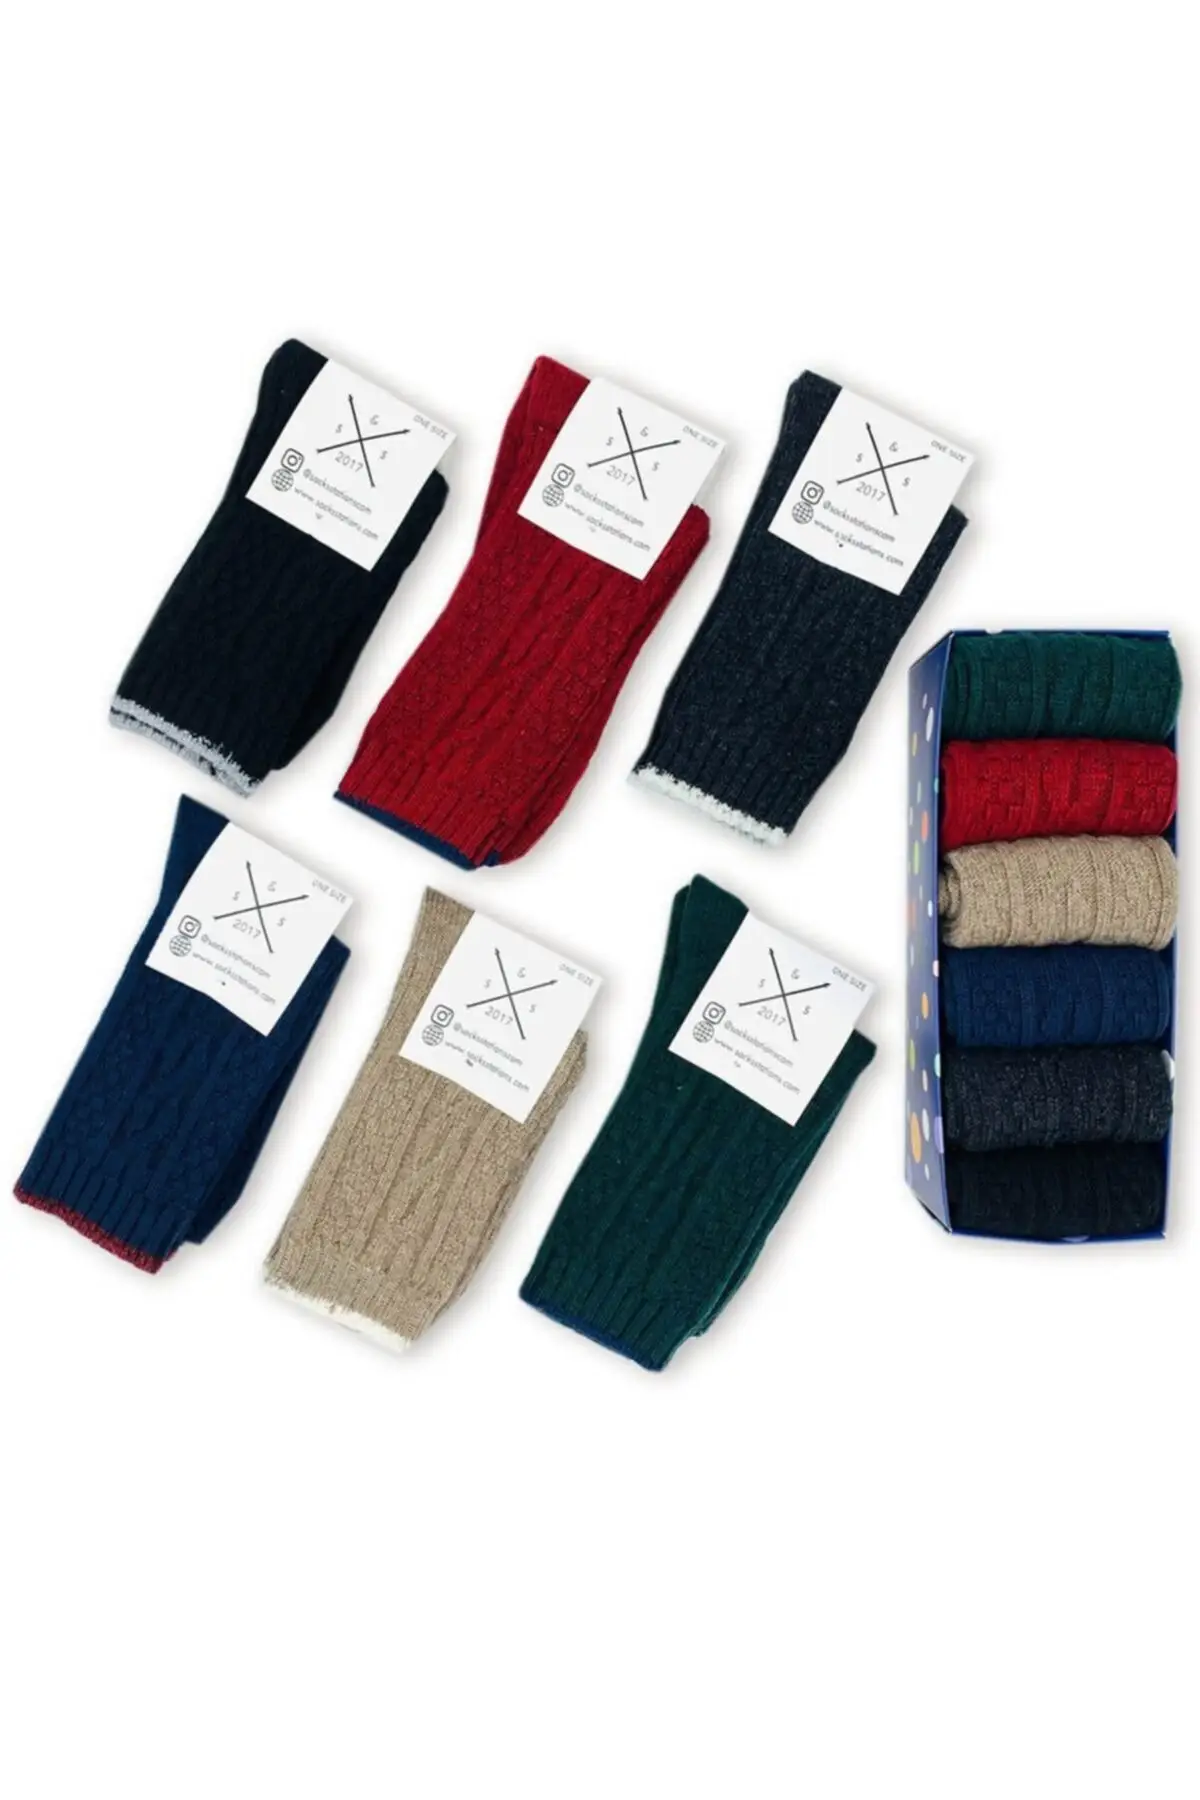 6 Pack Wool Socks Colorful Socks Box Unisex 2022 Winter Season, Don't Let Your Feet Get Cold, Giftable, Free Shipping,